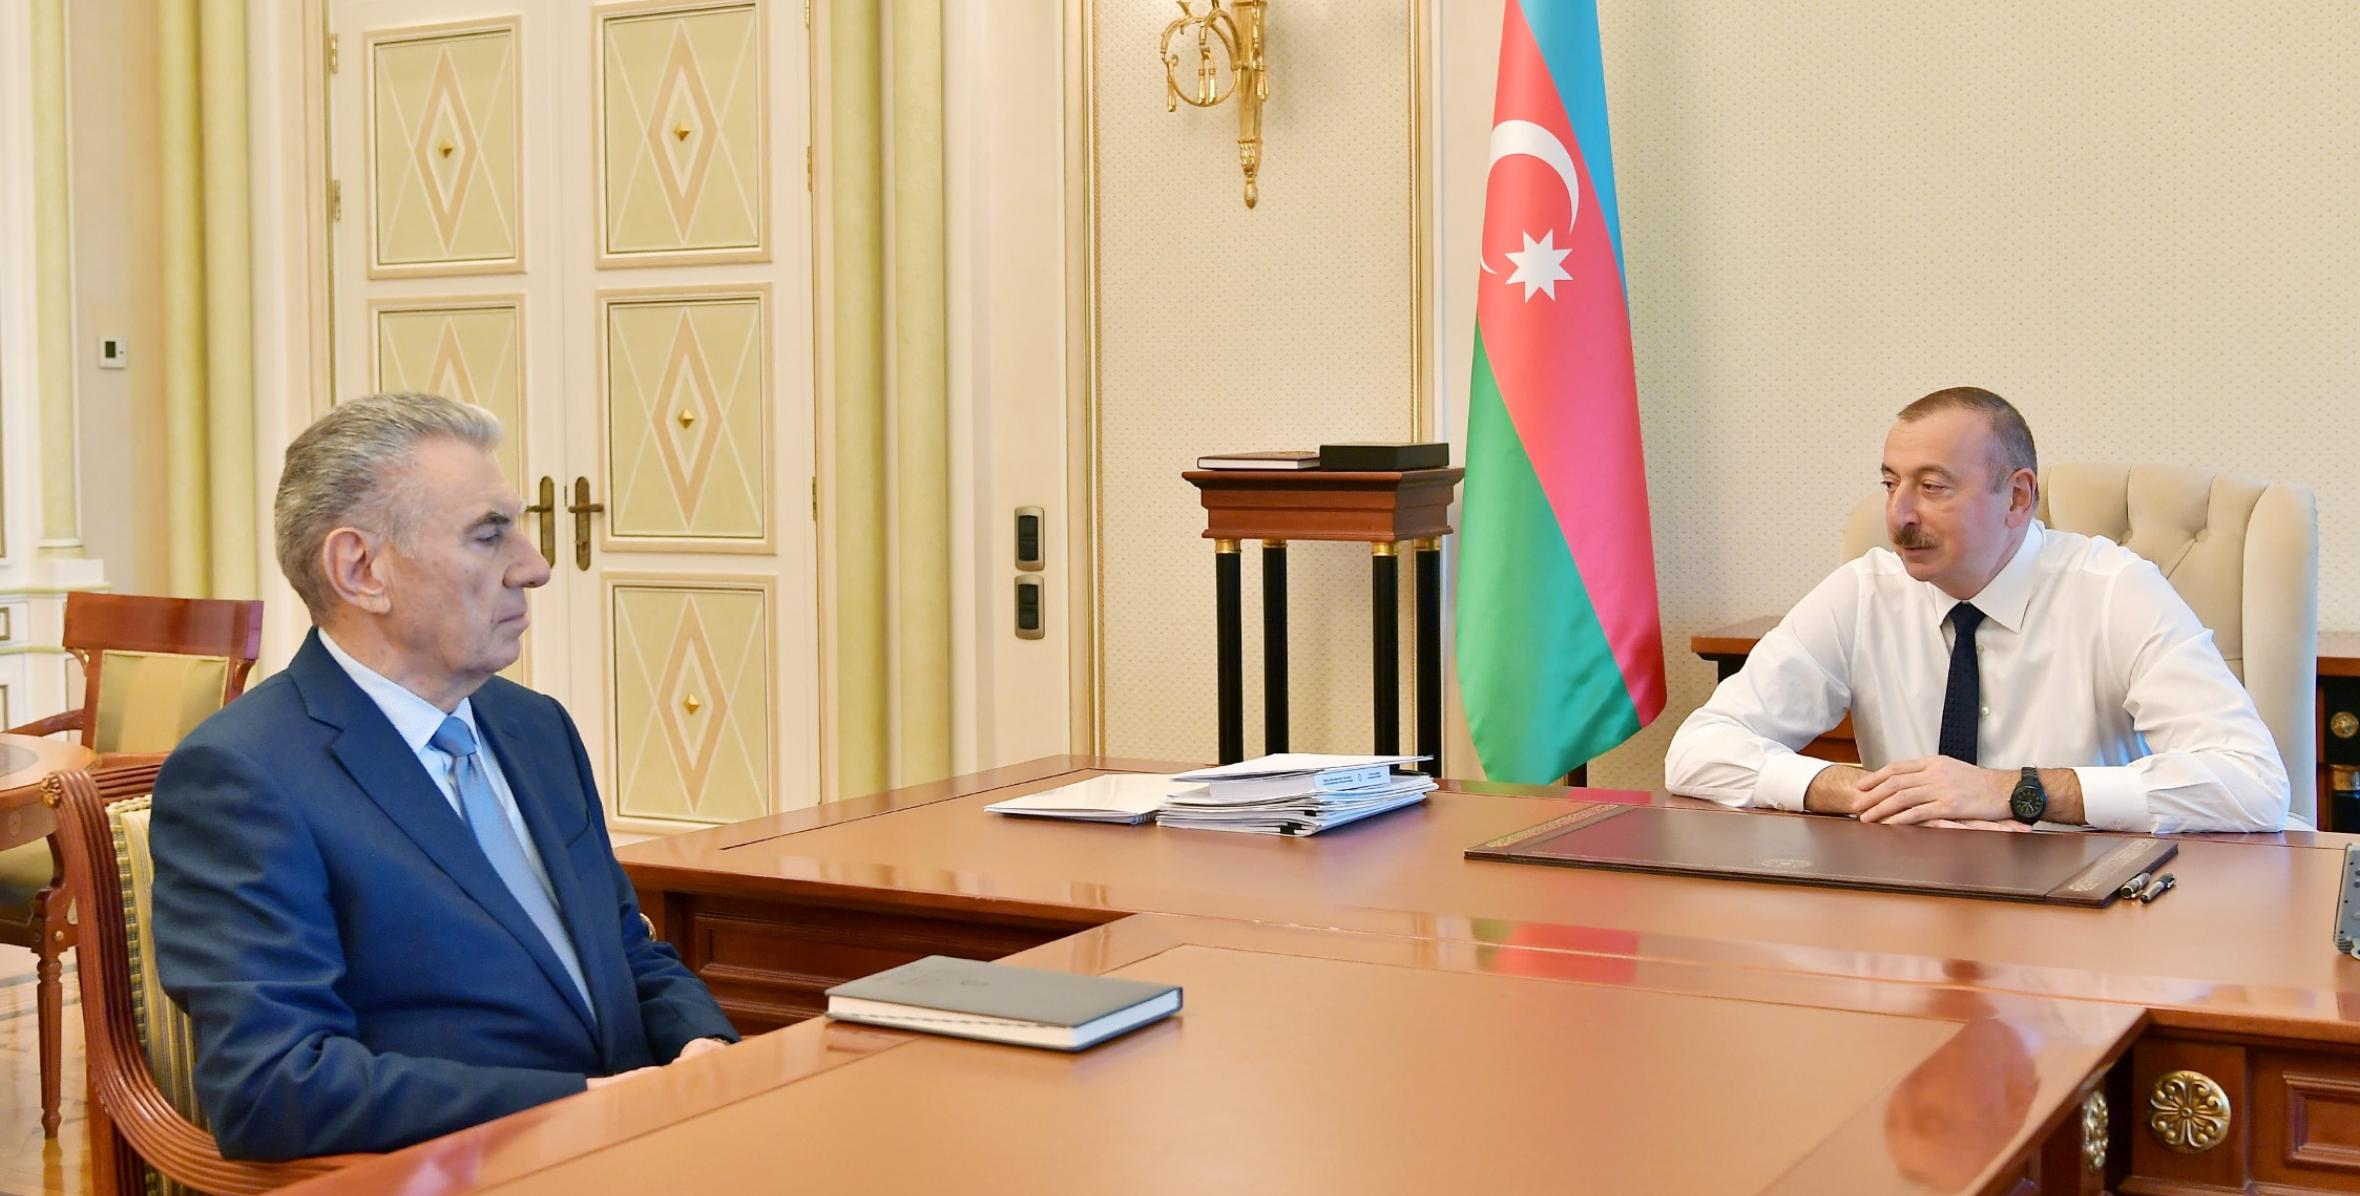 Ilham Aliyev received Deputy Prime Minister Ali Hasanov as he submitted his resignation letter